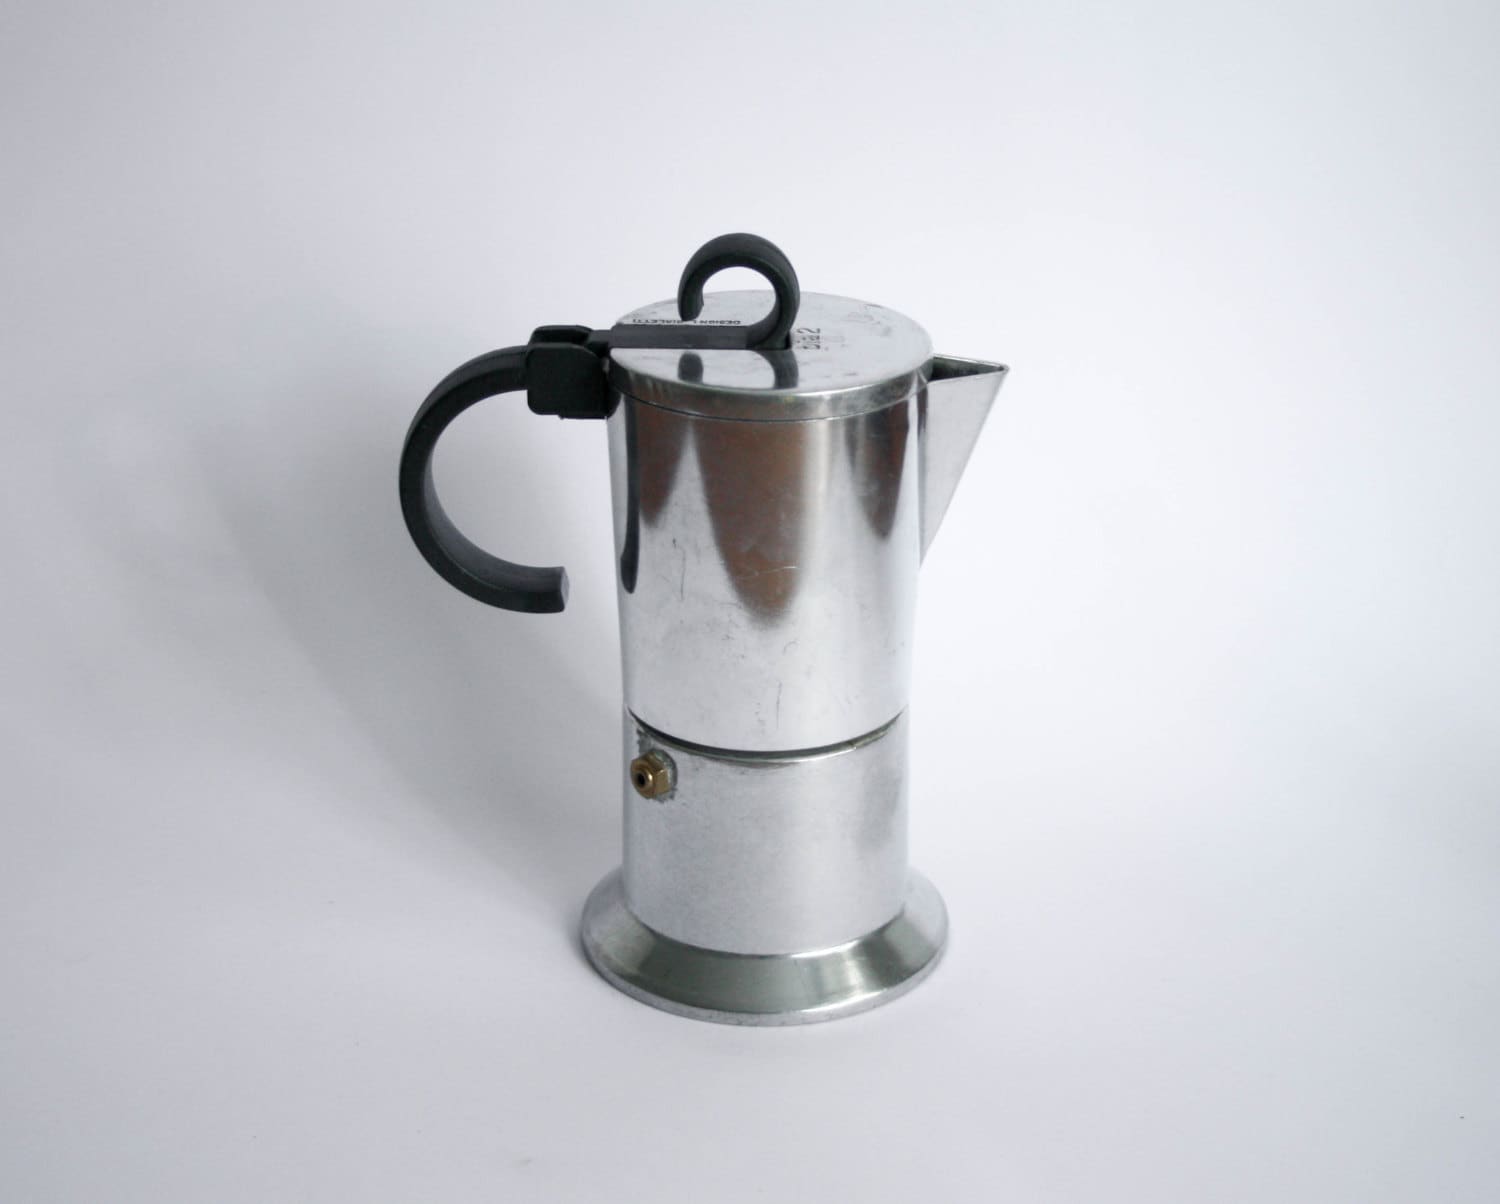 Vintage Italian Bialetti Coffee Maker BIA 2 Rare Out of